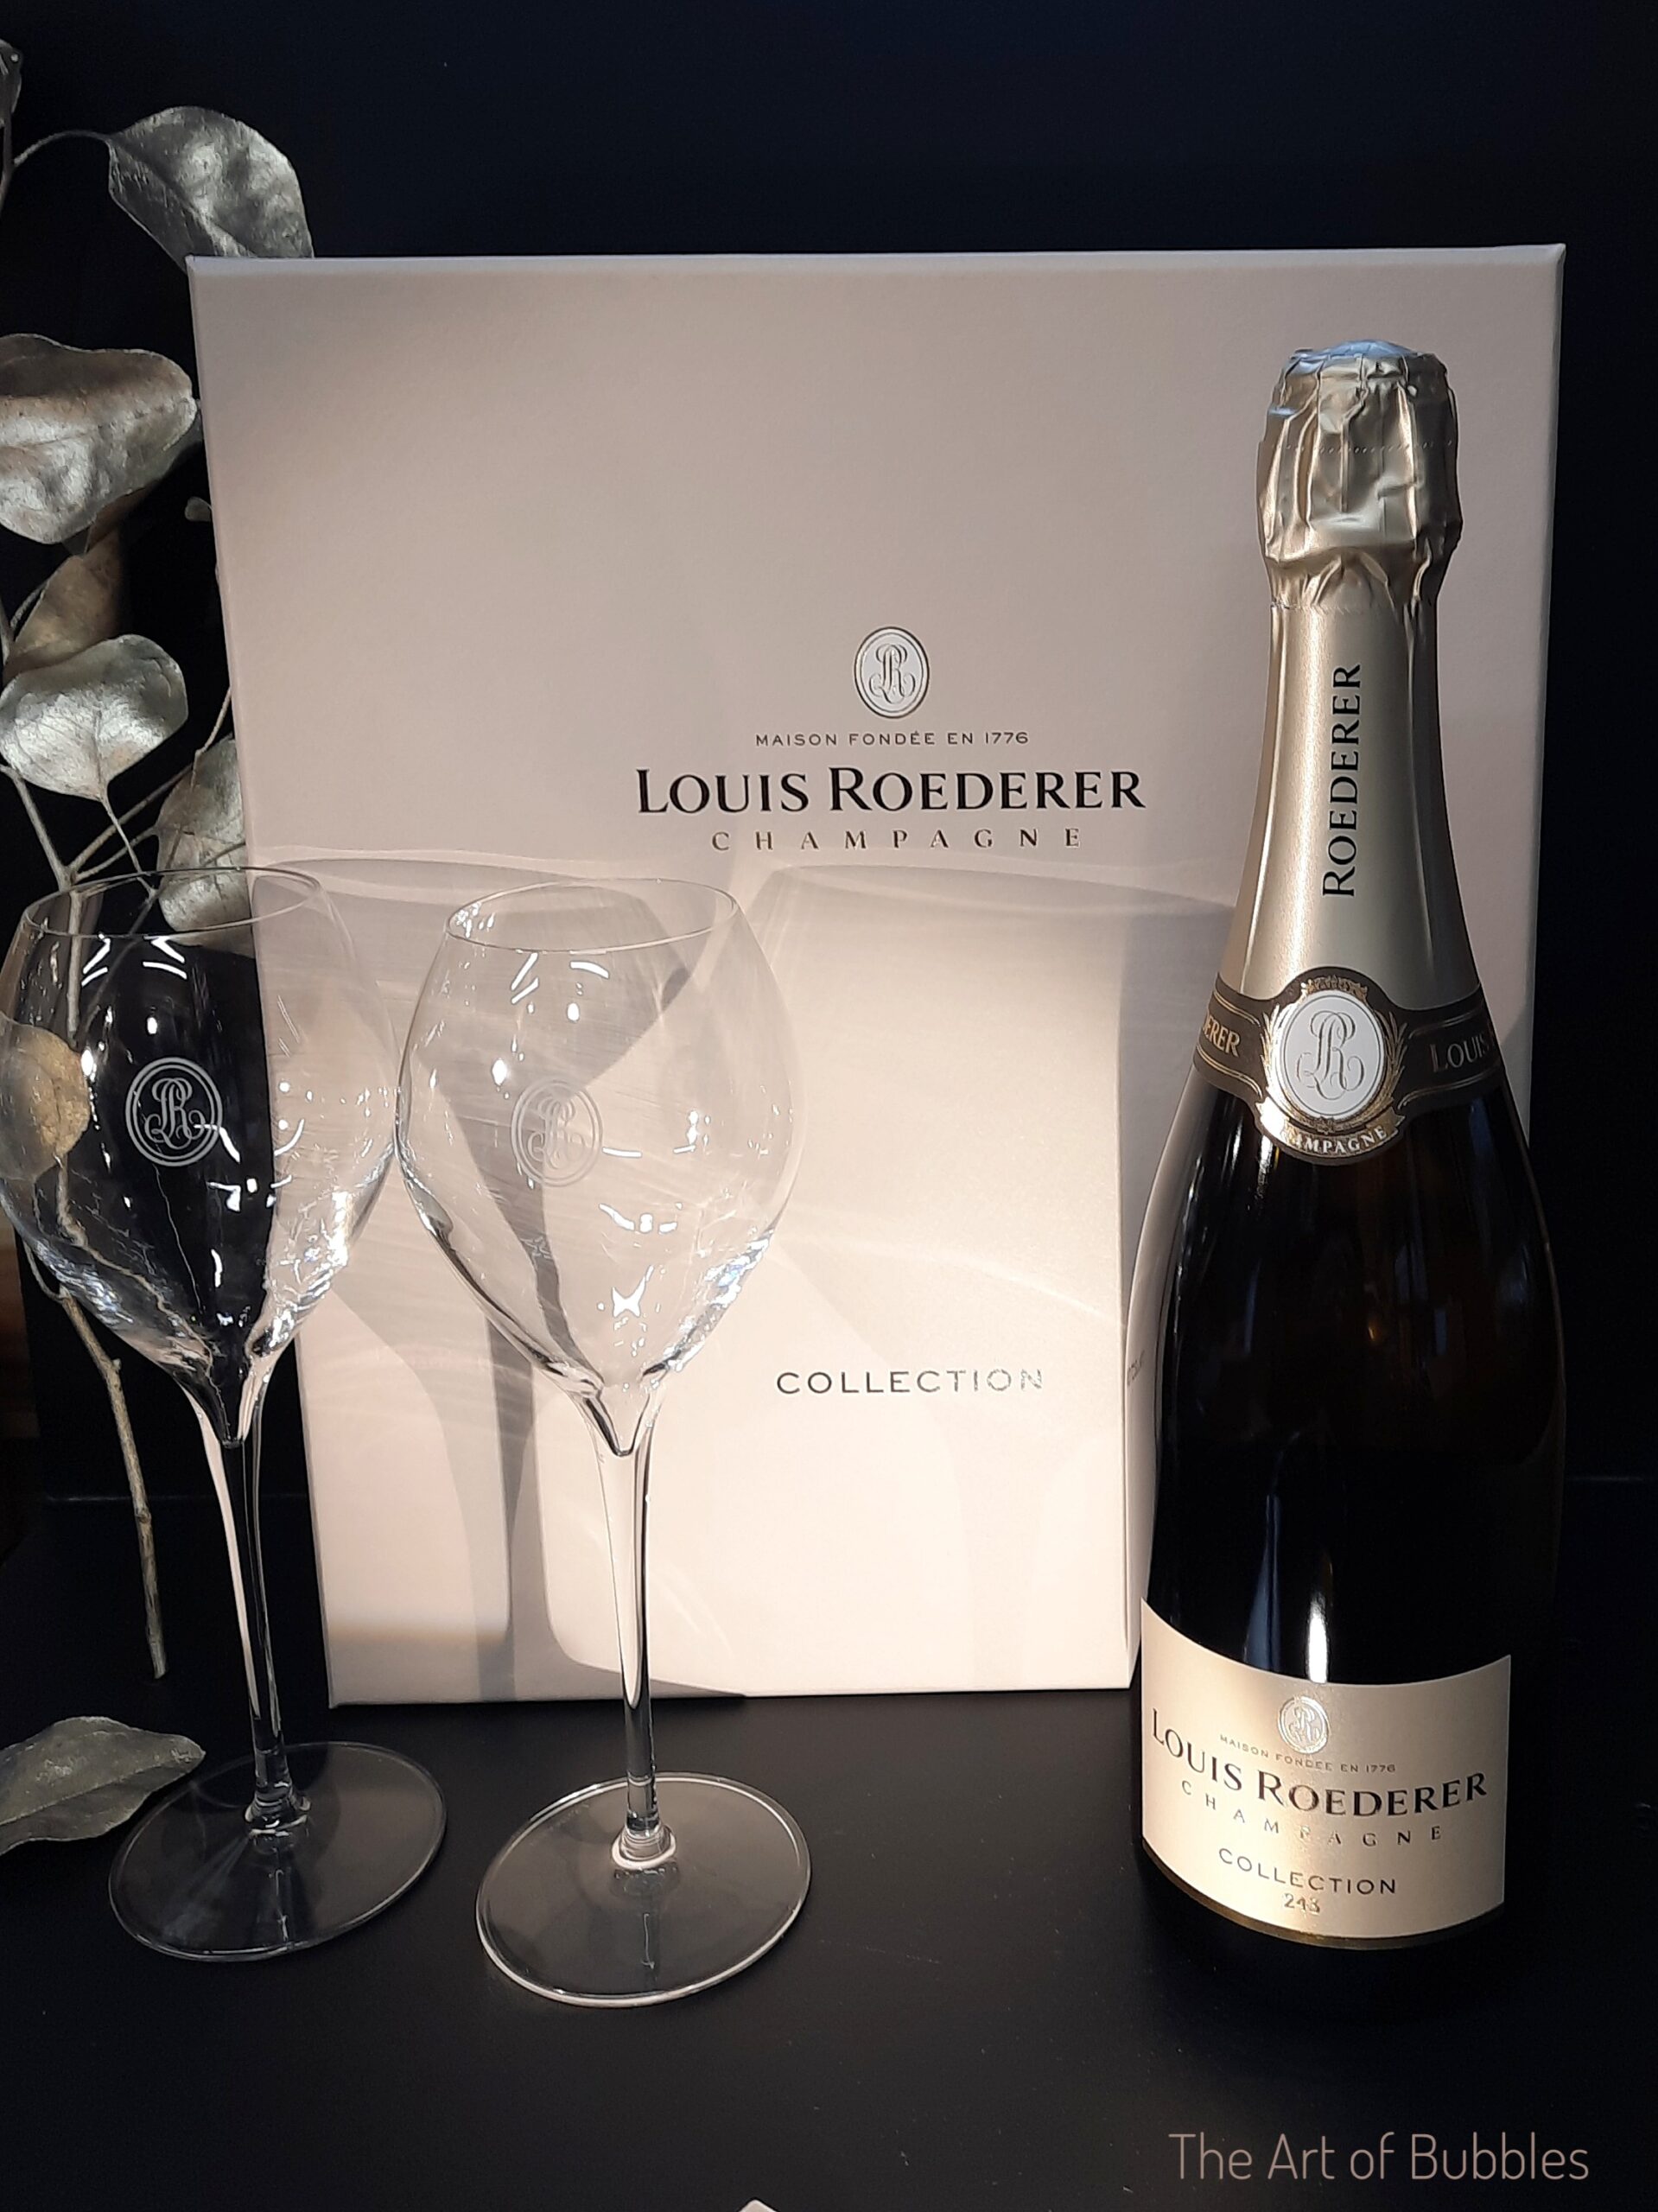 Champagne Louis Roederer AOC Champagne, Coffret collection 243, Champagne